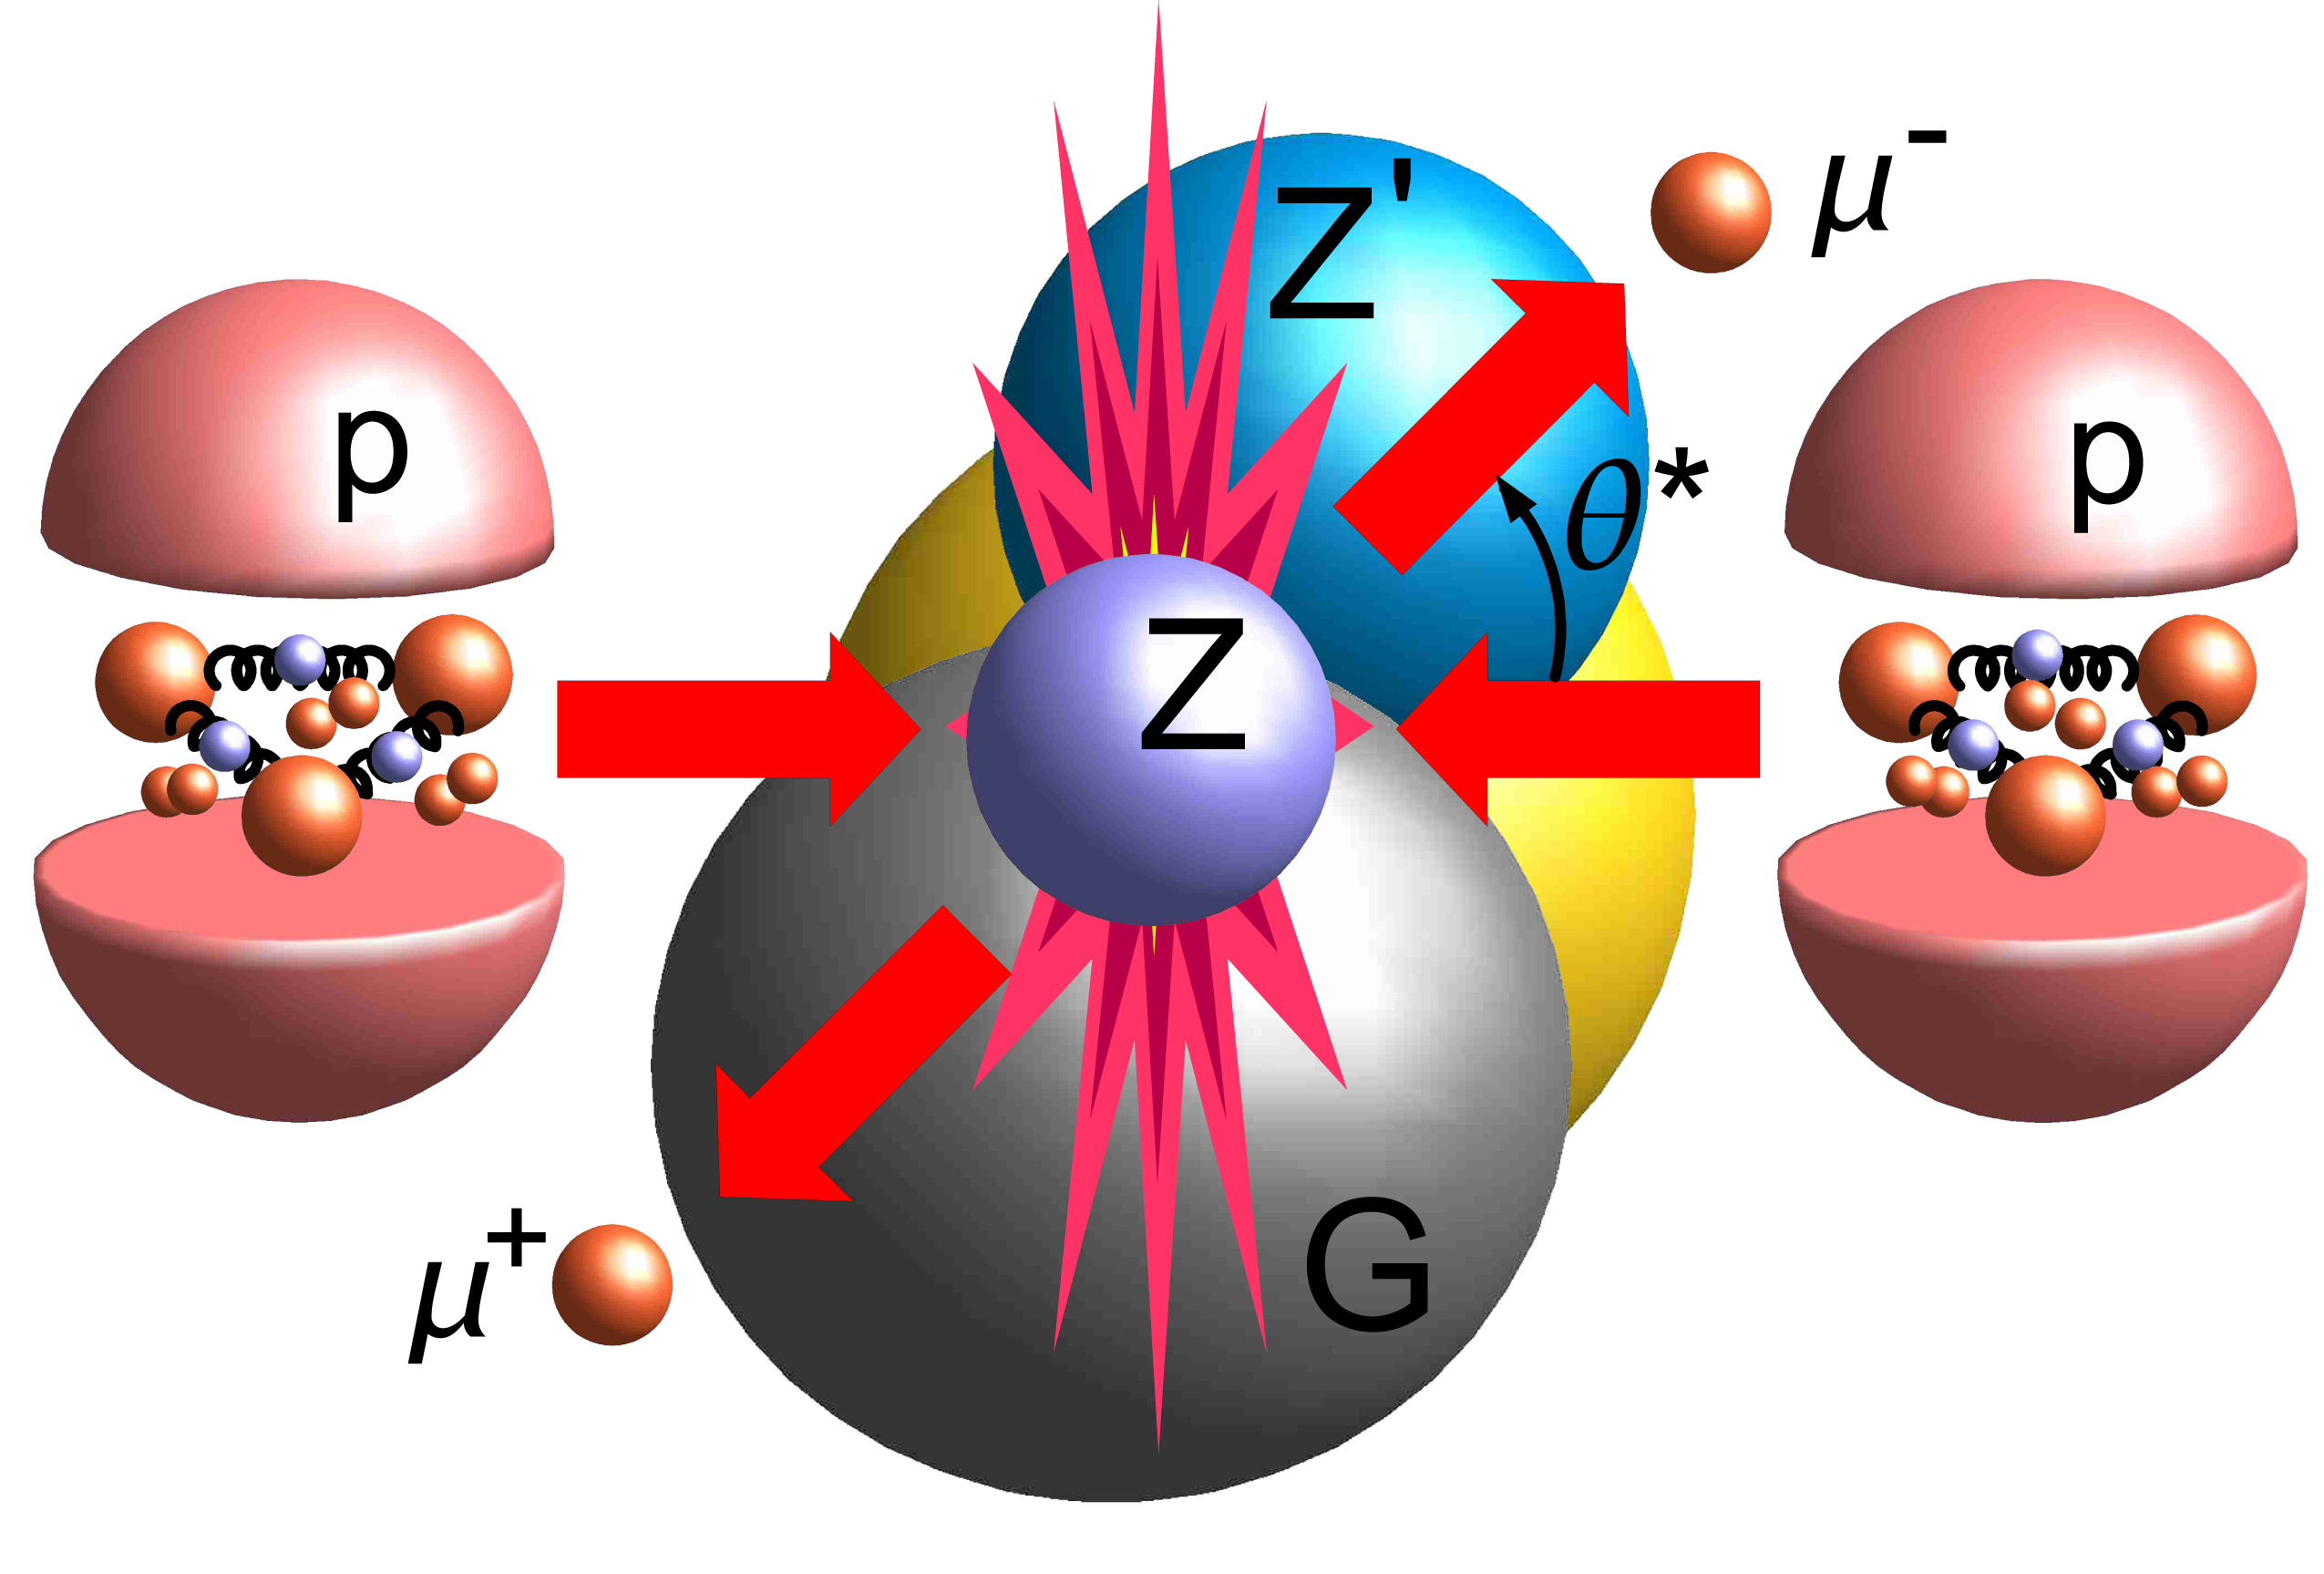 An event of proton-proton collision with a new particle produced and 